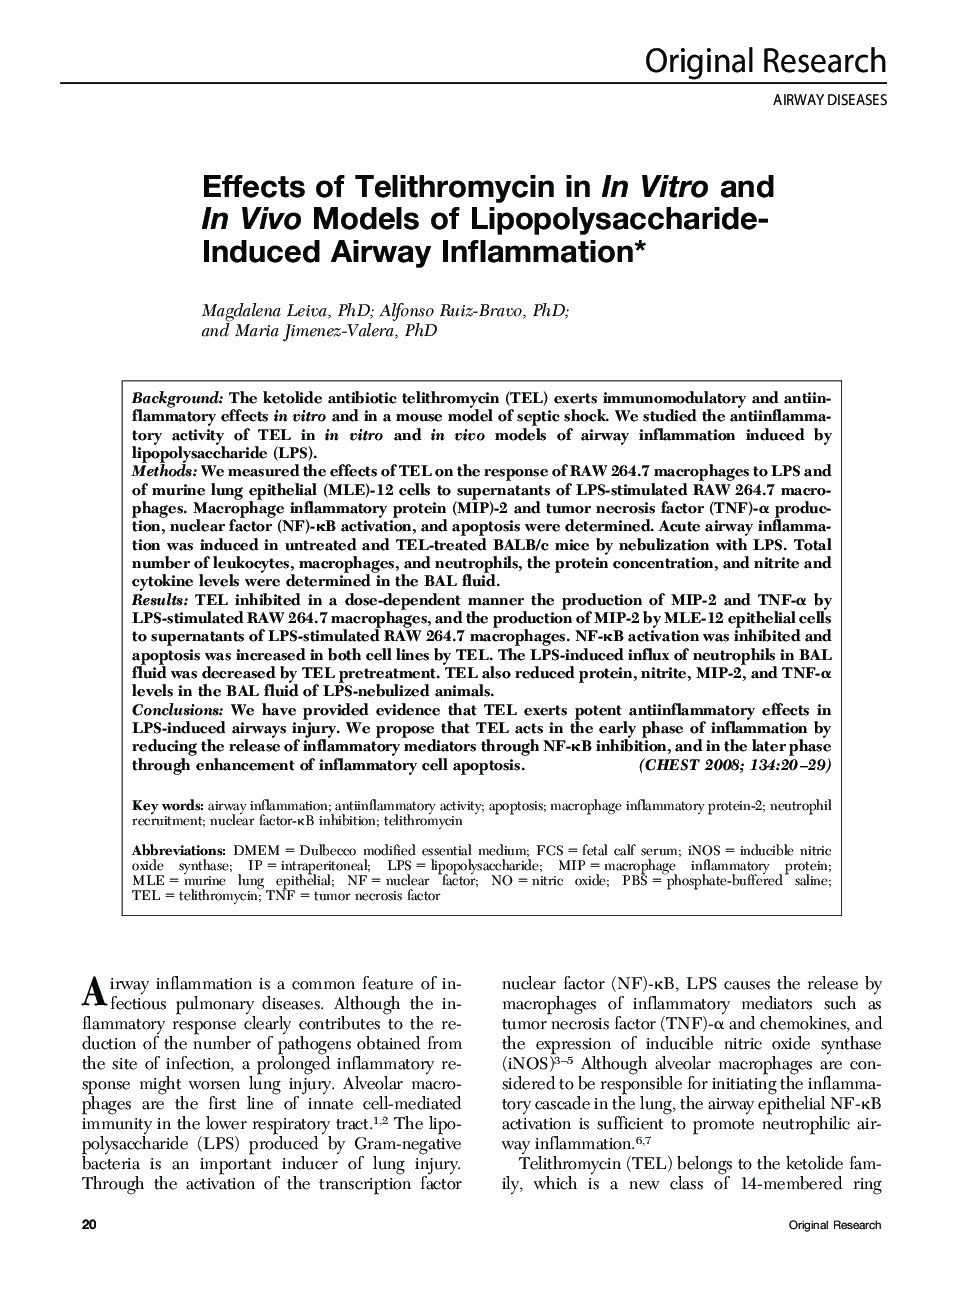 Effects of Telithromycin in In Vitro and In Vivo Models of Lipopolysaccharide-Induced Airway Inflammation* 